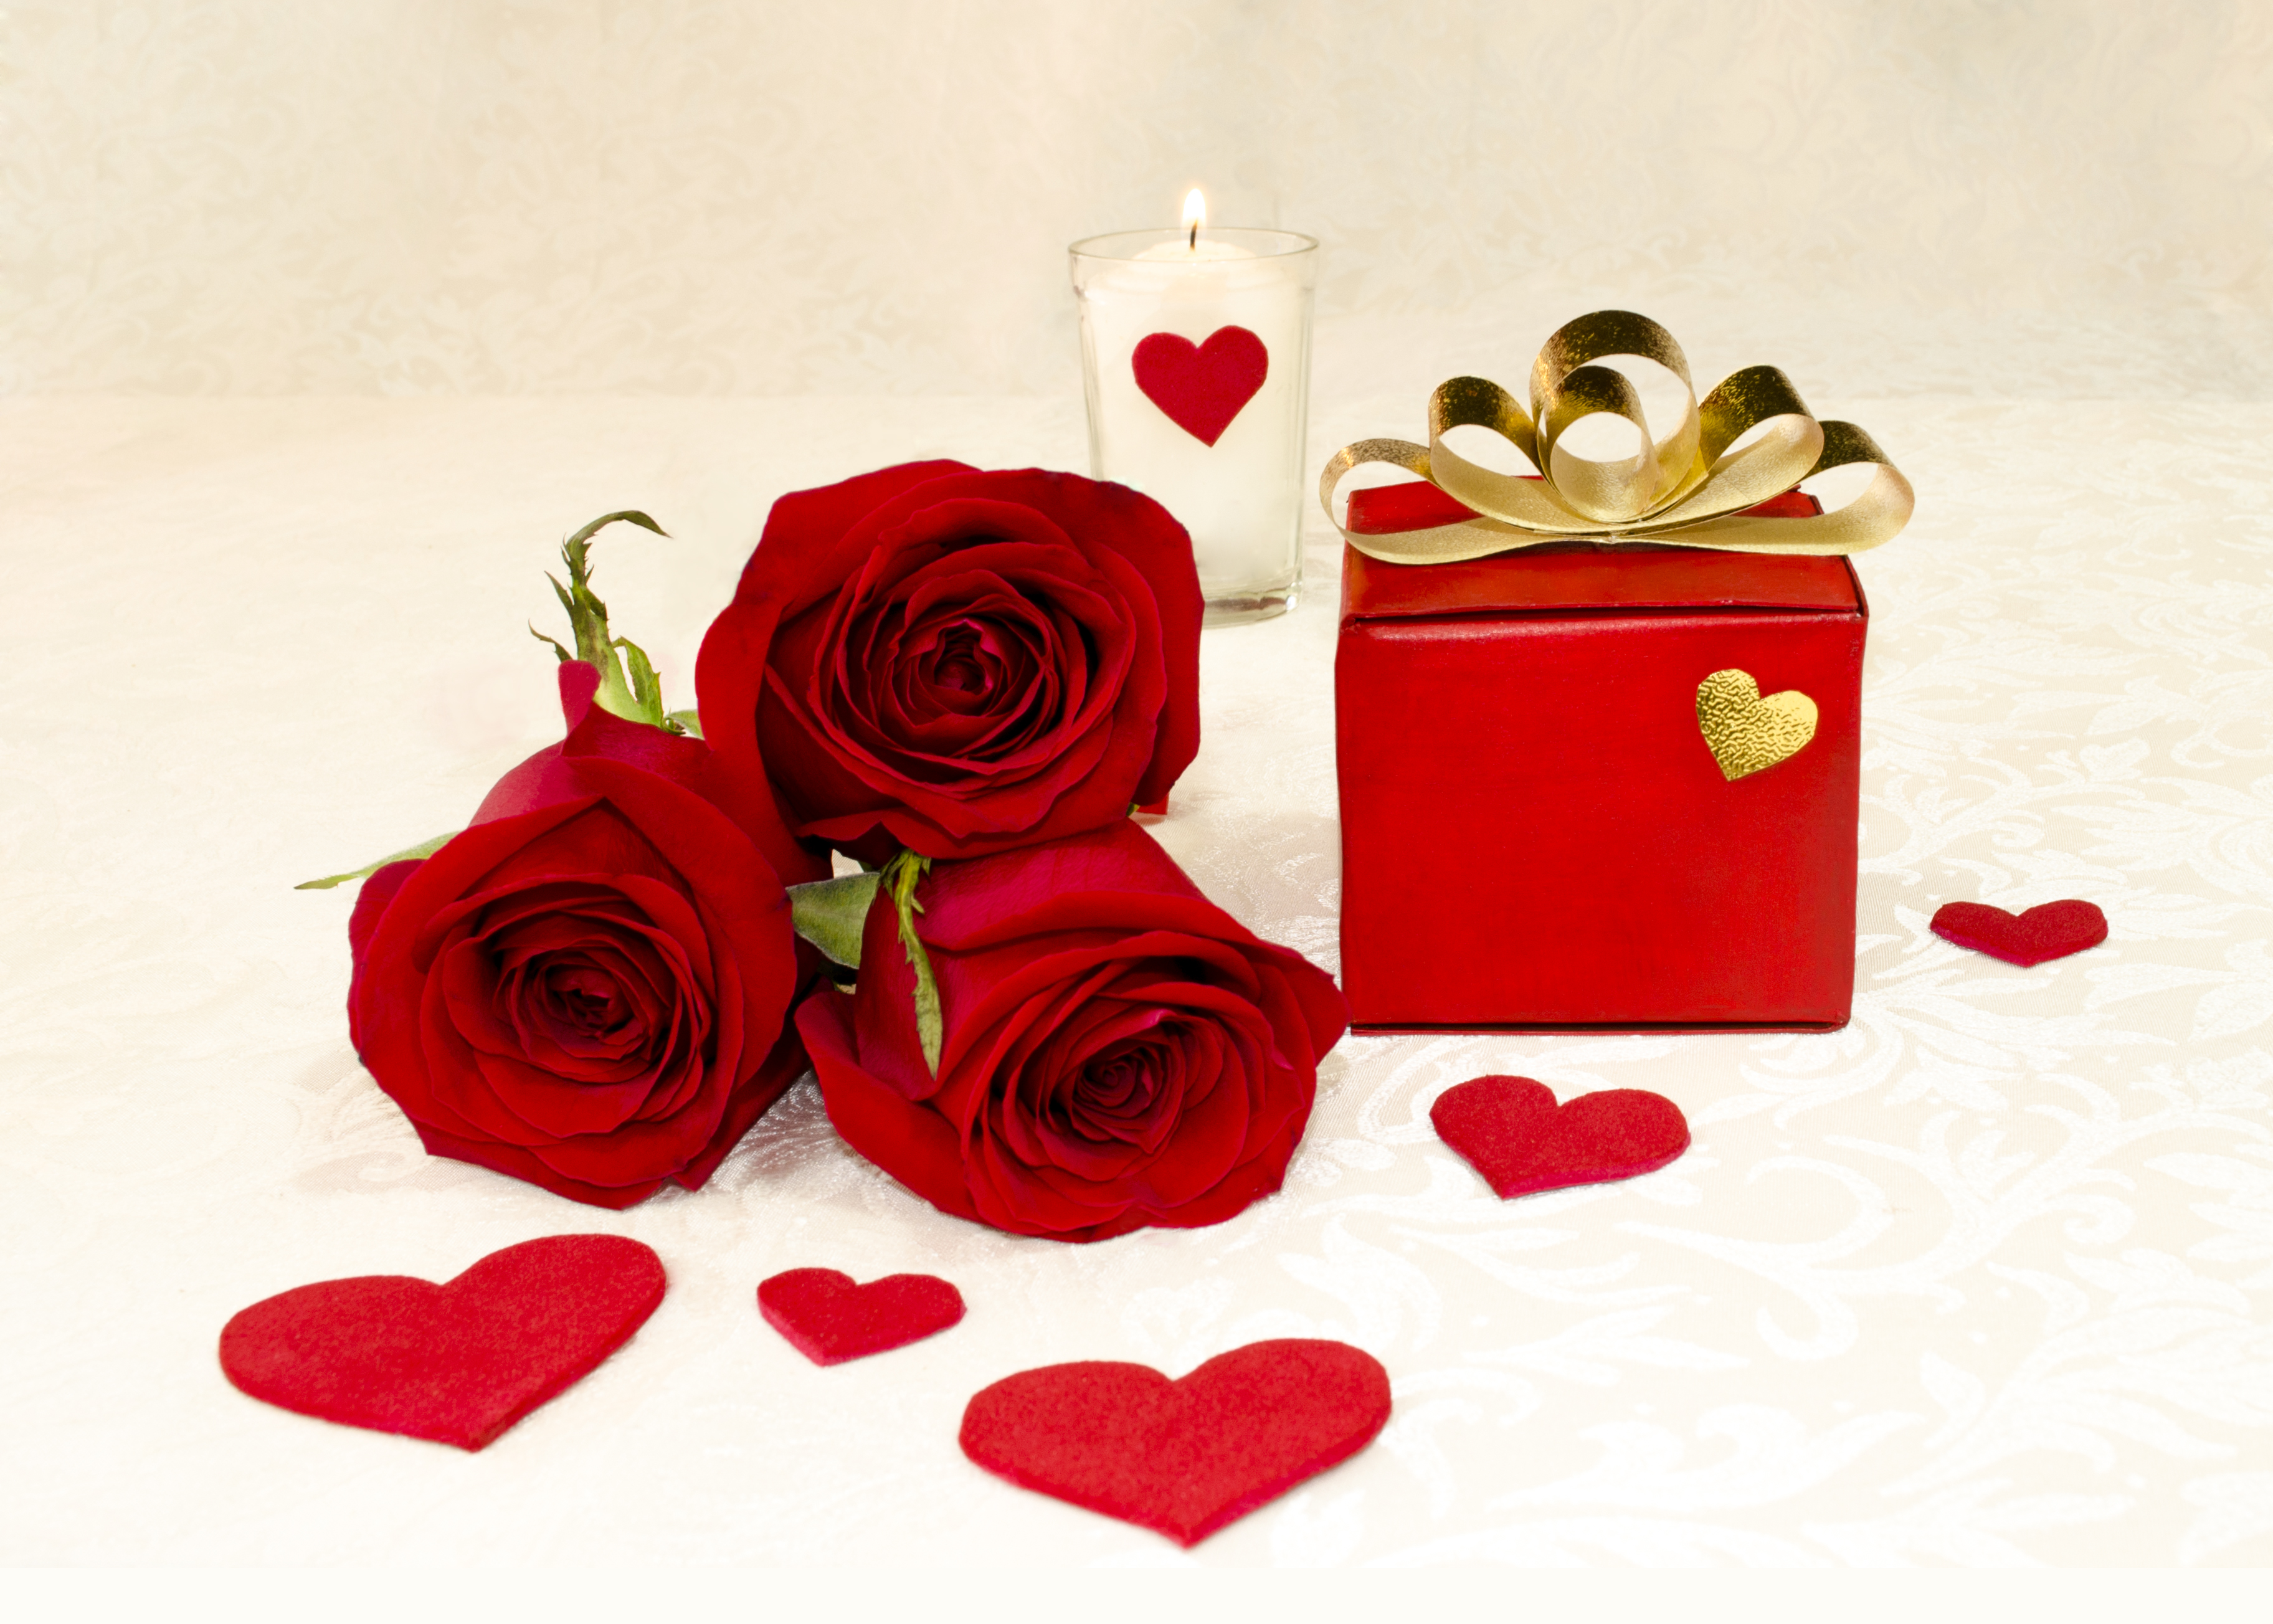 Three red roses and a gift photo